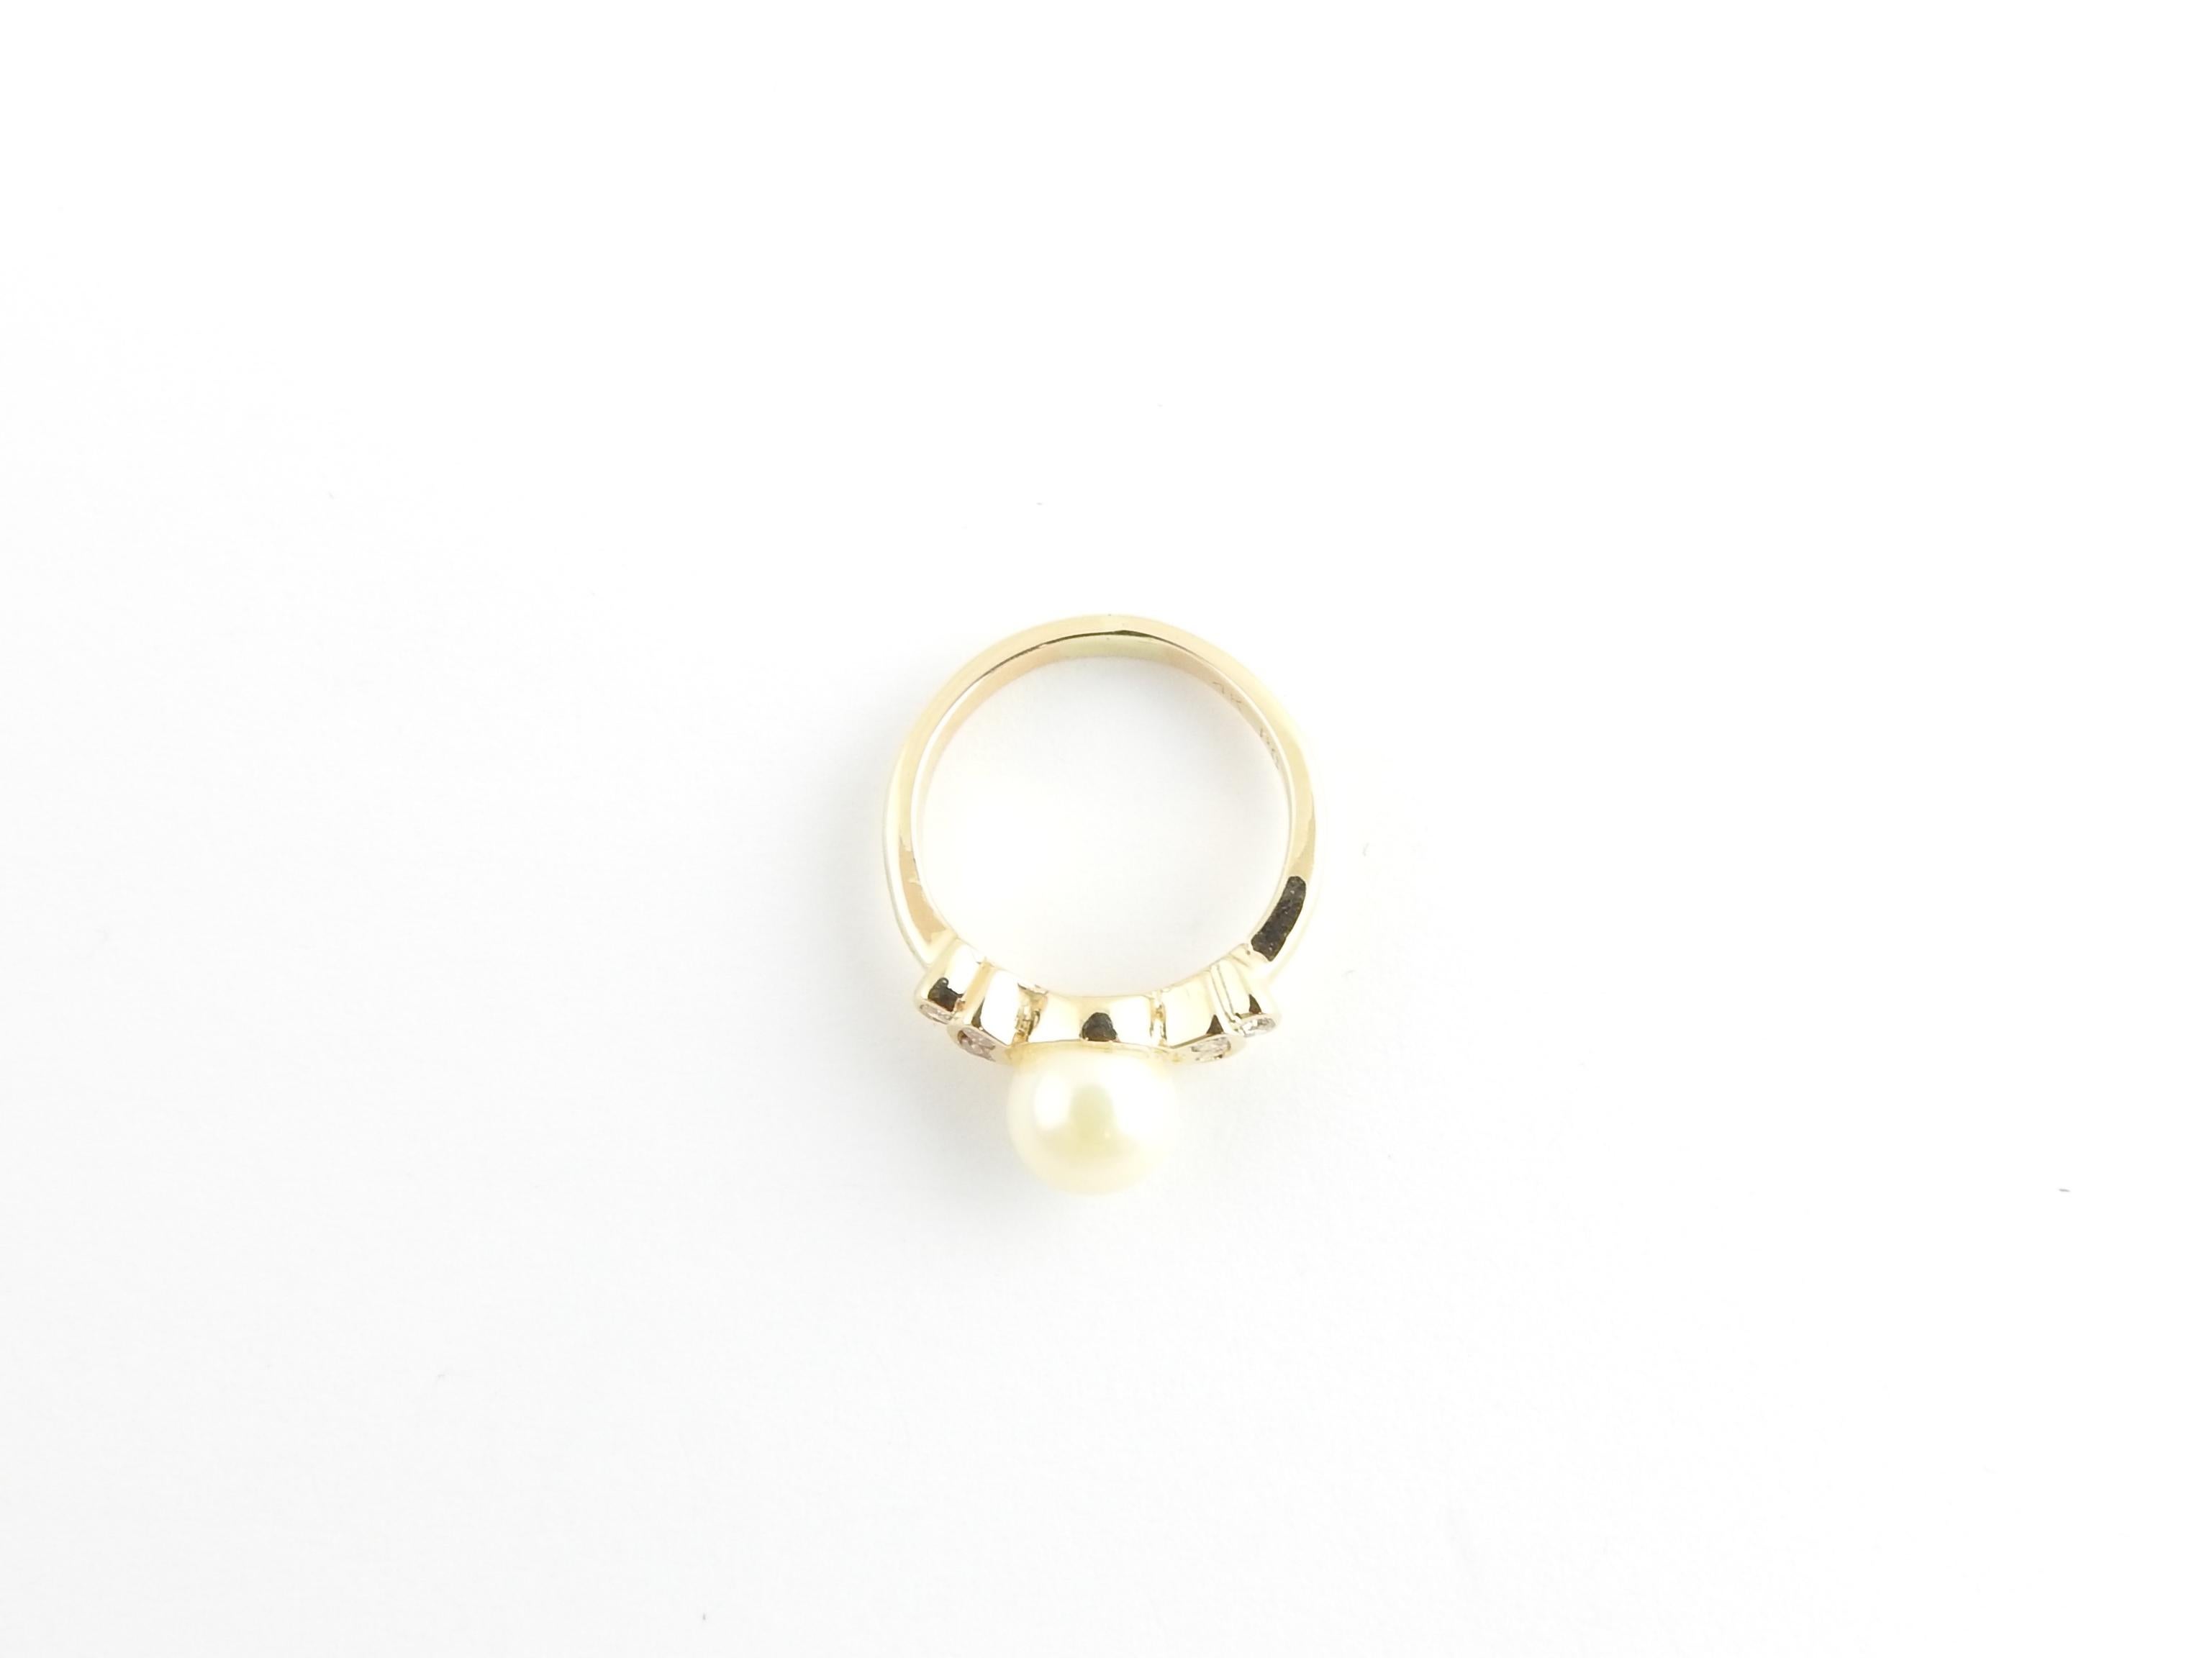 Vintage 14 Karat Yellow Gold Pearl and Diamond Ring Size 3.25

This lovely ring features one round pearl (6 mm) and six round brilliant cut diamonds set in classic 14K yellow gold. Shank: 2 mm.

Approximate total diamond weight: .06 ct.

Diamond